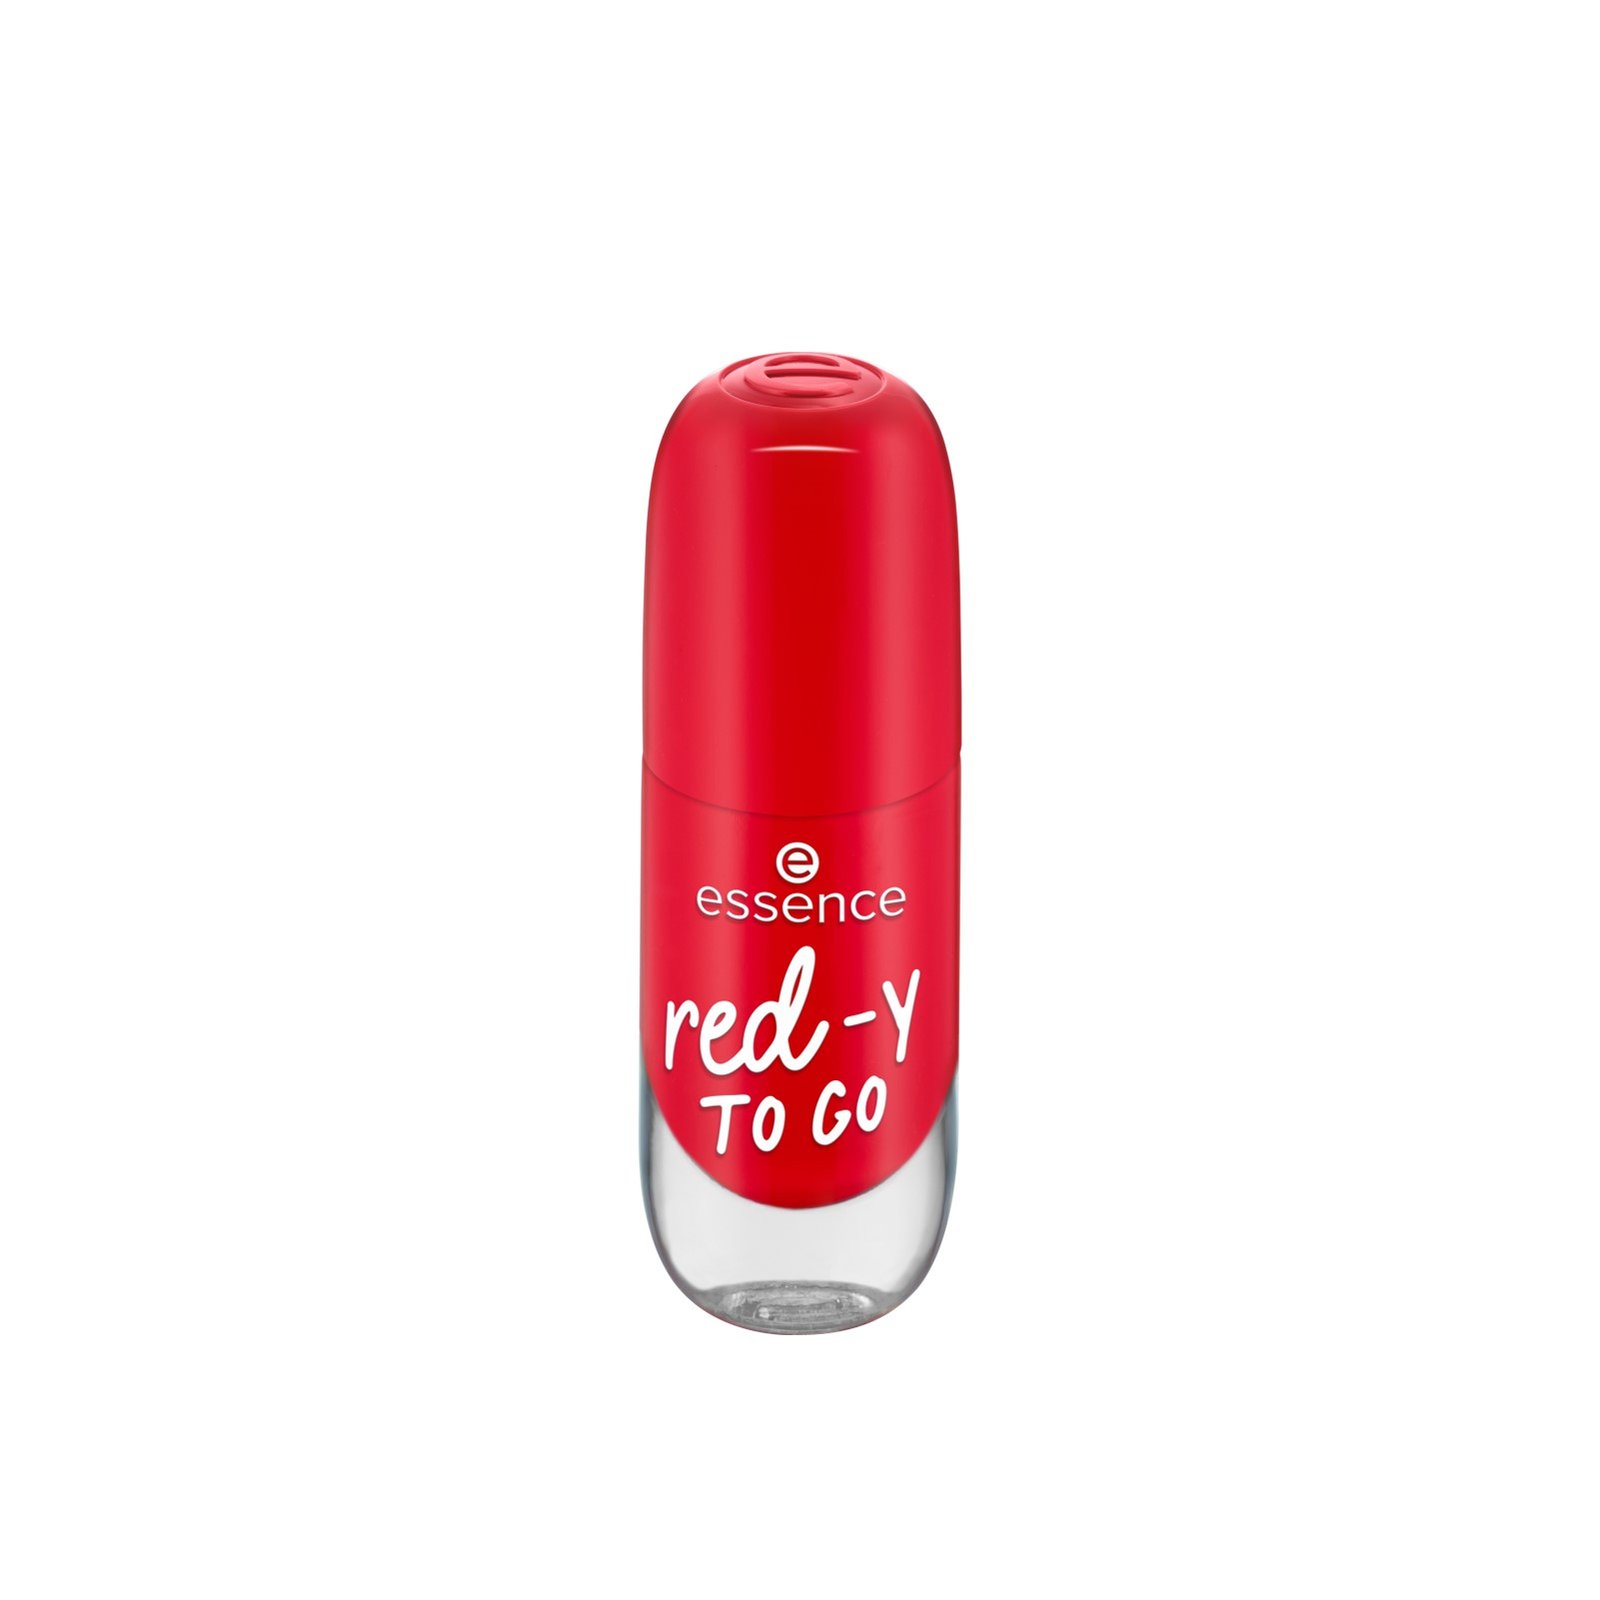 essence Gel Nail Colour 56 Red-y To Go 8ml